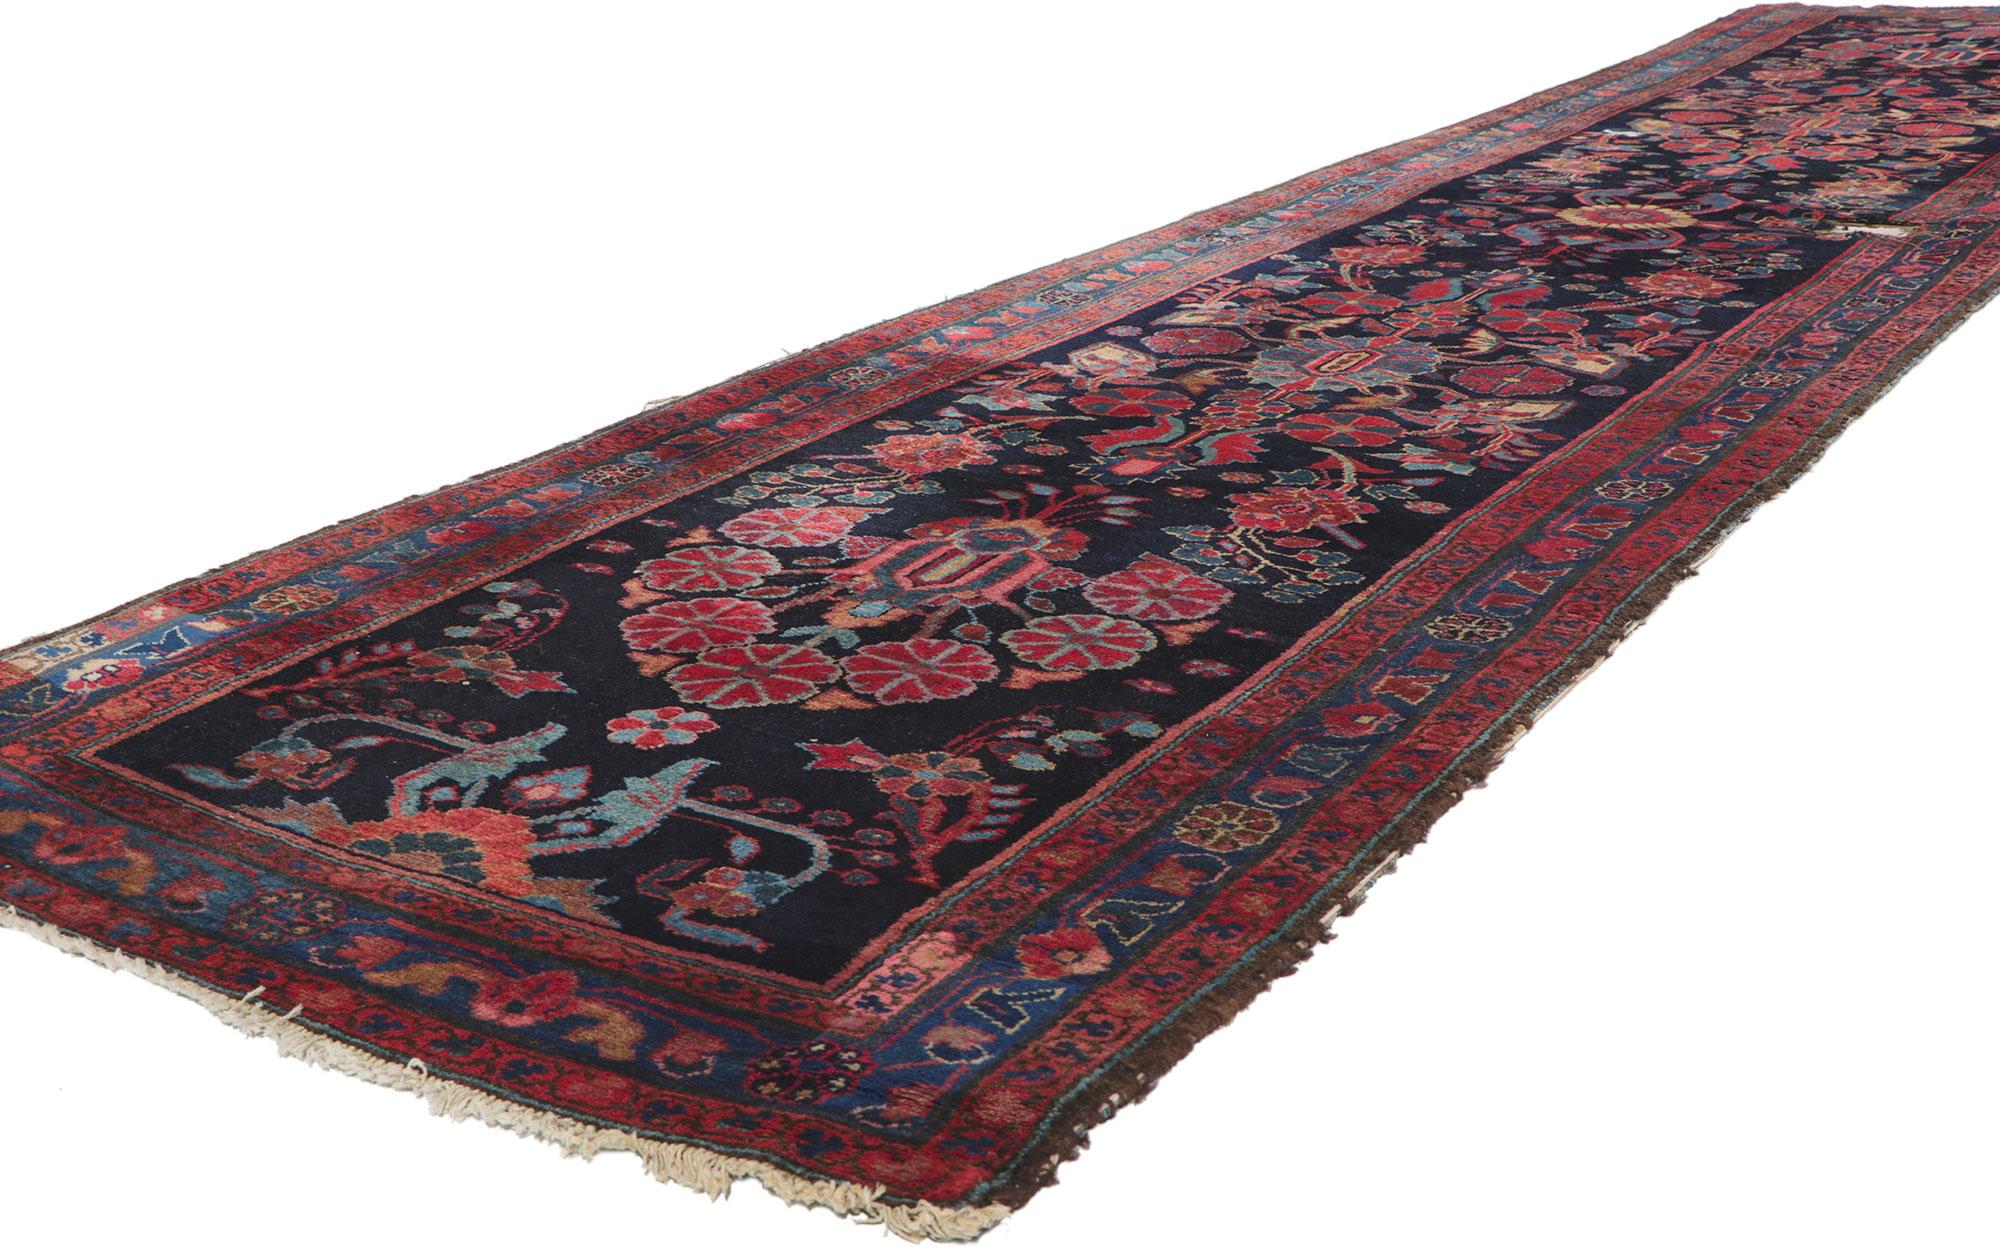 78148 Antique Persian Malayer runner, 03'02 x 14'09. Rugged beauty and a timeless design rustic sensibility, this hand knotted wool antique Persian Malayer runner will take on a curated lived-in look that feels timeless while imparting a sense of